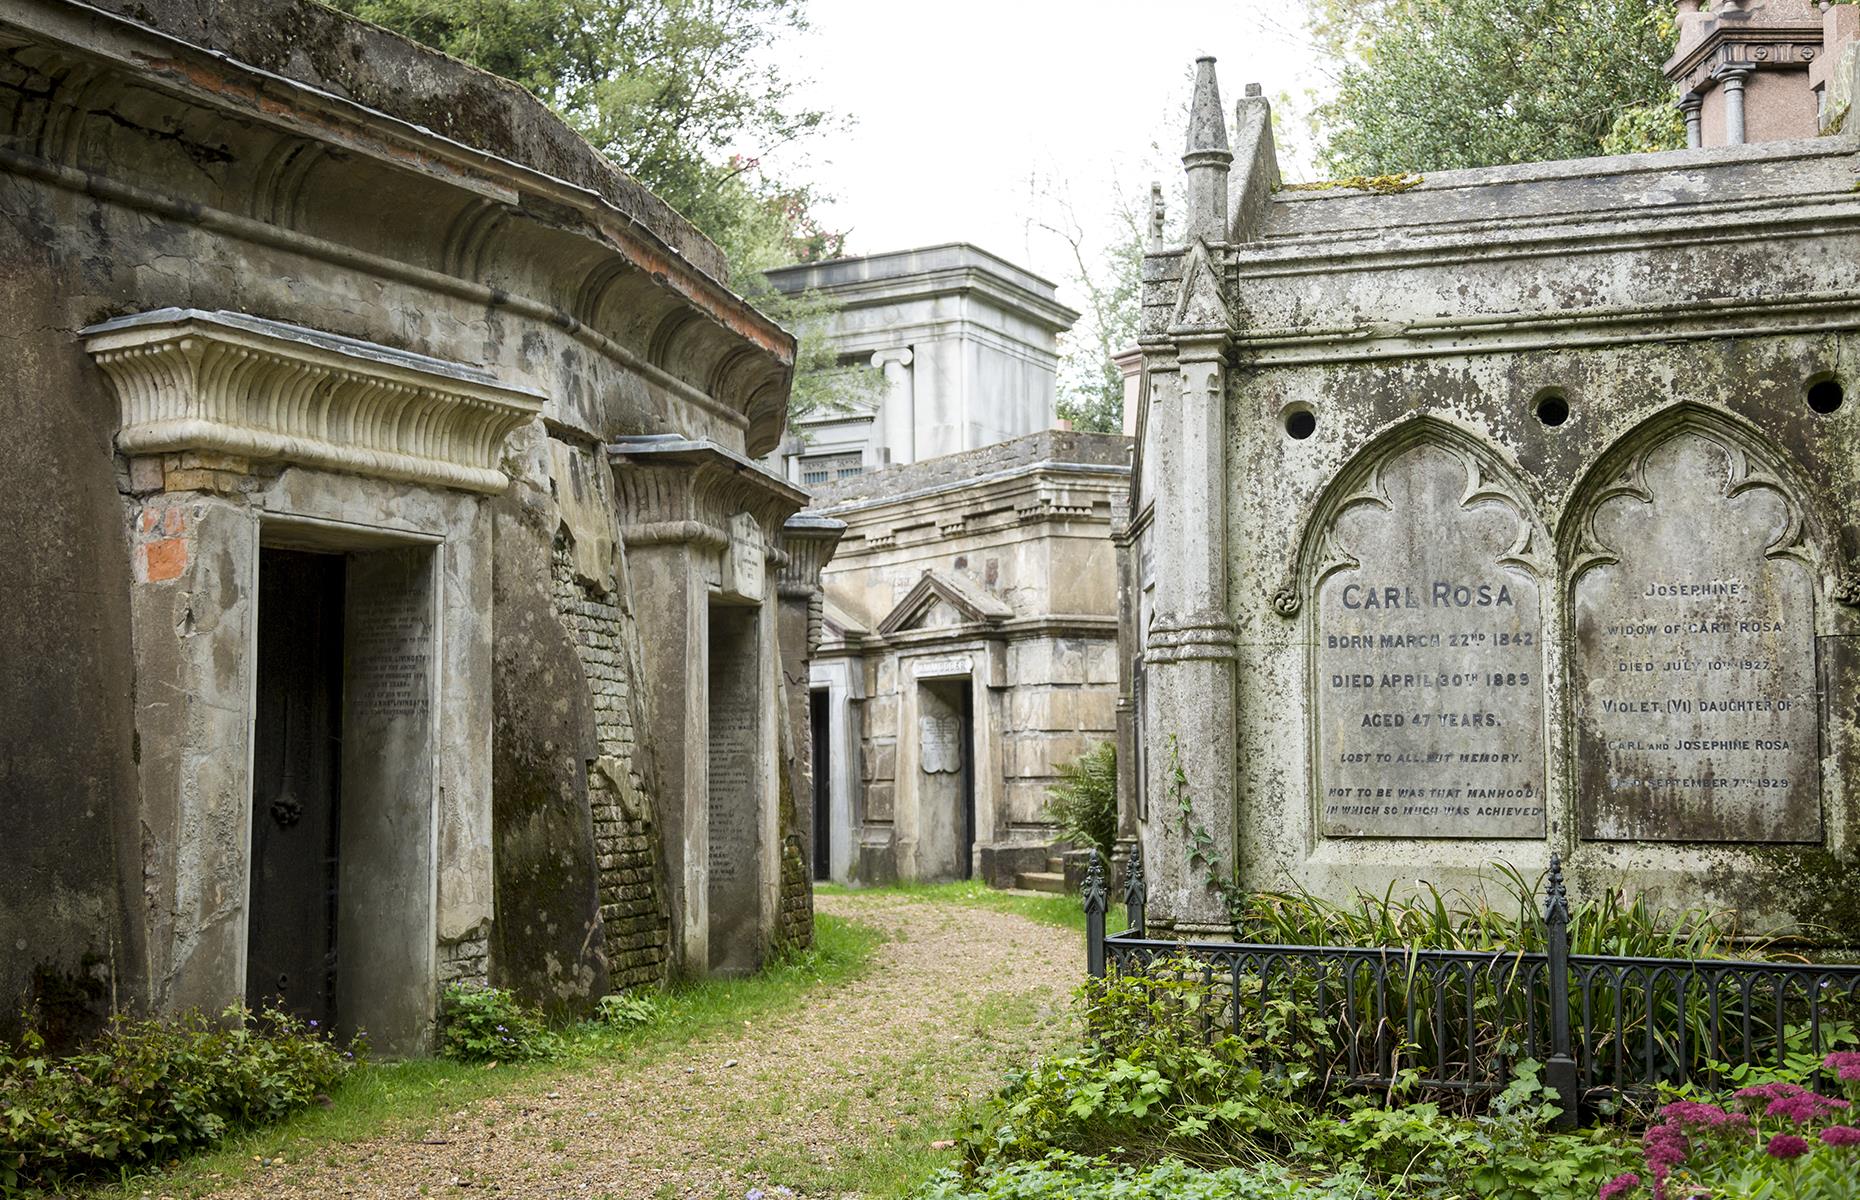 <p><a href="https://highgatecemetery.org/">A cemetery</a> holding some 170,000 people and around 53,000 graves – many of them long abandoned – is a recipe for spooks and spirits. And, in the 1970s, reports of the supernatural here at Highgate were rife. Ghostly shapes had reportedly been seen wandering about the tree-shrouded tombstones, while animals were found dead, with injuries to the neck. The macabre goings-on were attributed to the so-called Highgate Vampire and books were even written on the subject. Although decades have passed, a wander through the green-choked gravesite is just as haunting.</p>